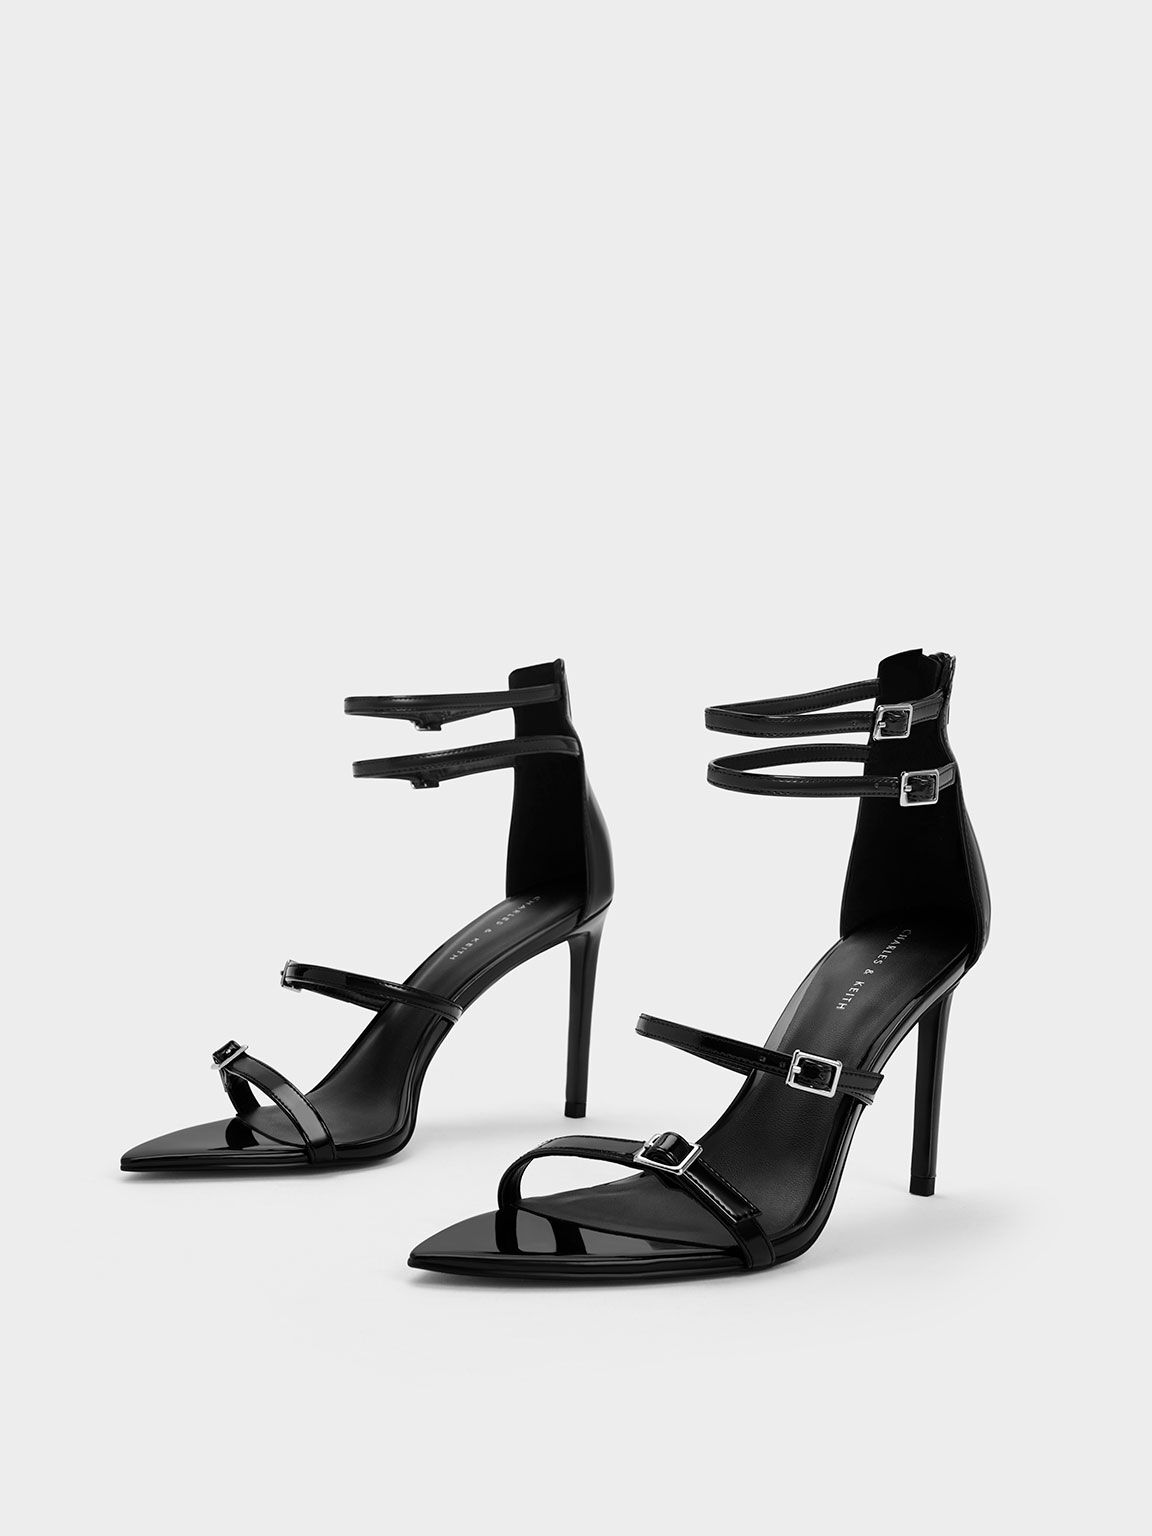 Black Patent Strappy Heeled Sandals - CHARLES & KEITH PT